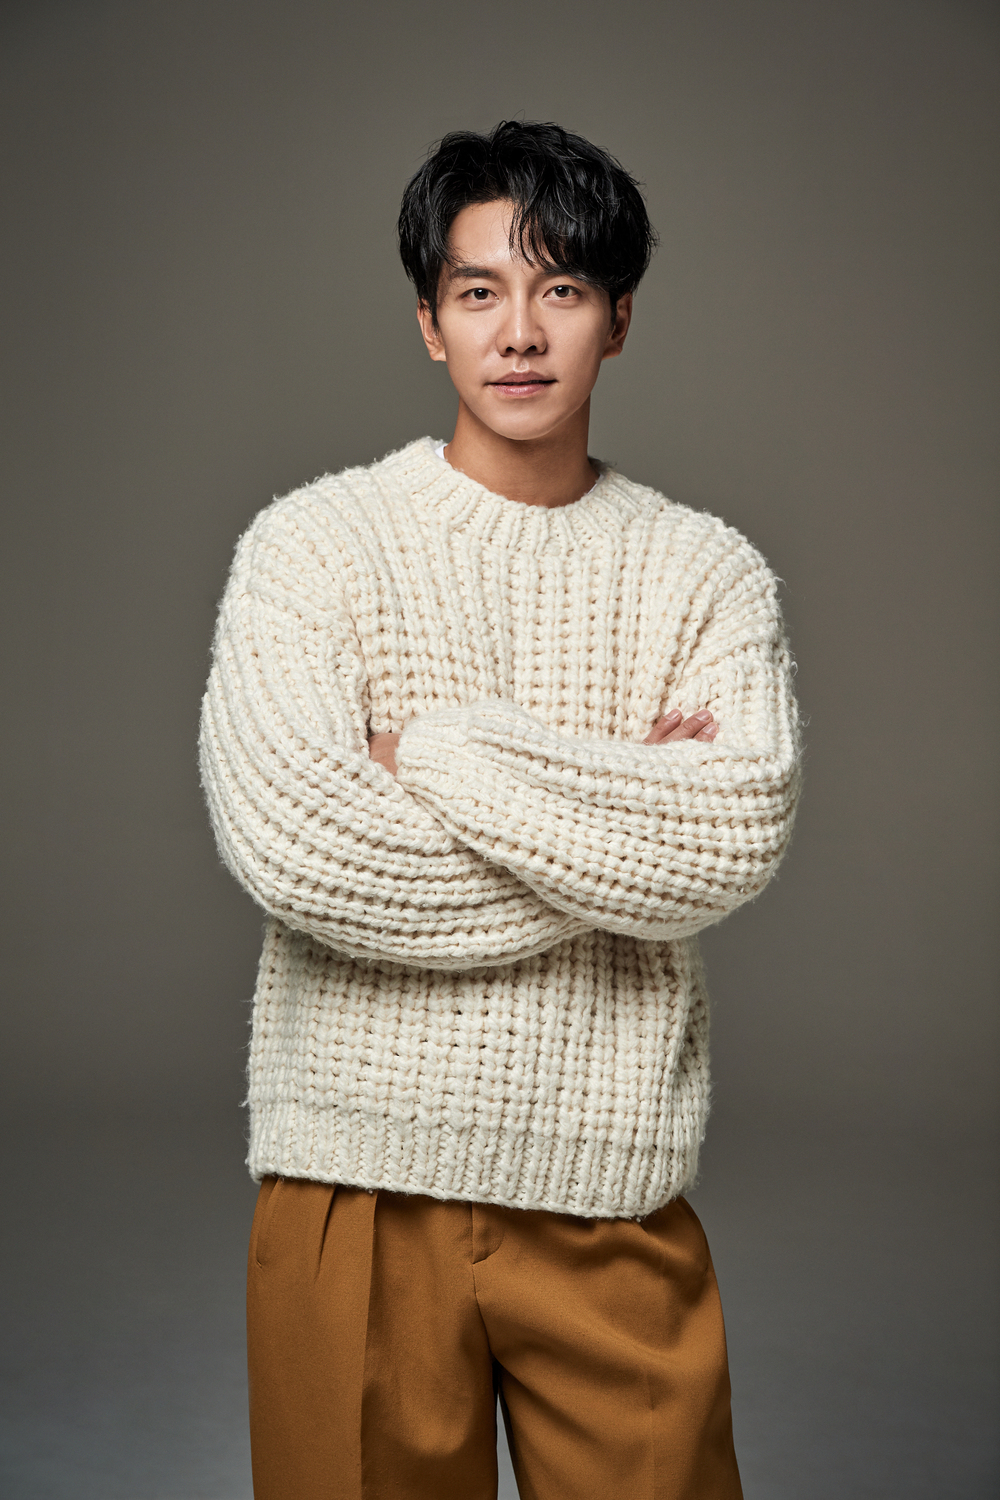 Actor Lee Seung-gi has changed.Lee Seung-gi, who mainly showed good, good, playful and friendly characters, played the role of Cha Dal-gun in SBS gilt drama Vagabond (playplayplay by Jang Young-chul, Jung Kyung-soon/directed Yoo In-sik), and showed off his previous acting and rough characters.Lee Seung-gi said: Ive come to participate in a work that is so grateful.It was my first goal to make a work that was not ashamed while making it, but after that, I think it will be a work that is proud of my filmography because many people like it. I made a lot of differences in detail when I made a dictionary.If the production period is short, it may be seen as a gap in the possibility of an accident or an event. It seems that I was able to shoot a little more closely when I took a lot of time.I think there is also the advantage of letting me run tight after I want to loose after shooting. Chadalgan, in the center of Vagabond, is a stuntman whose Jackie Chan is a role model of life.I entered the stunt world with a multifaceted dream of catching up with the World Action film industry in the future.The owner of 18 martial arts martial arts, which is made up of Taekwondo, Judo, Jujitsu, Kendo and boxing.The life of an ordinary young man who lives hard for his dreams changed 180 degrees after losing his nephew in the Planes crash.After losing his son and only family nephew in his heart and finding out that there was a conspiracy in the Planes crash, Chadalgan fought a huge power and life struggle to uncover corruption.Cha Dal-geons Feelingssssssss line was in conflict with the characters Lee Seung-gi had shown before: Anger control disorder was so explosive every time she showed her Feelingssssssss scene.Im sure he had a lot of Feelingssssssss.Lee Seung-gi said, I talked a lot with the director, and I was worried about whether to approach reality or to catch the tone of acting easily because it is drama.Our Drama seems to have not been calm because it has been digging into the immersion of this case with the authenticity of Chadal Gun, he said.If you make a two-hour movie, it is right to run to this Feelingssssssss. It is a 16-part work, so people who see intense Feelingssssssss every time can think that Is not he too angry?But I had to choose. Part 16 Drama, but not long. I drew about what happened in about a month.I thought that a man who bought a nephew and lost terrorism would be Feelingsssssssss who would rather approach normal thinking and communication, so I took a tone with rough Feelingssssssss. So did Feelingssssssss, and my body must have been tough, Lee Seung-gi said, Im so sick of my neck, Ive tried it on several tones.Its not easy to get excited from 6 a.m., but I played it with a excited tone until 10 p.m. I had to rehearse it, and that part was a lot of physical consumption.Lee Seung-gi said he could see Drama in real time after shooting and have time to look objectively at Drama and his acting.I was well received by viewers, but I acknowledged that I was sorry to reflect on it and regret it. When I saw the shooting getting longer, I heard Feelingsssssssss that the tension was getting used to the back for a few years.In a year of shooting, of course, even the strongest Feelingssssssss gods get used to Feelingssssssss. There were some gods that seemed to be easily familiar.I thought I should be careful if I take a picture next time. (Continue on Interview2)emigration site